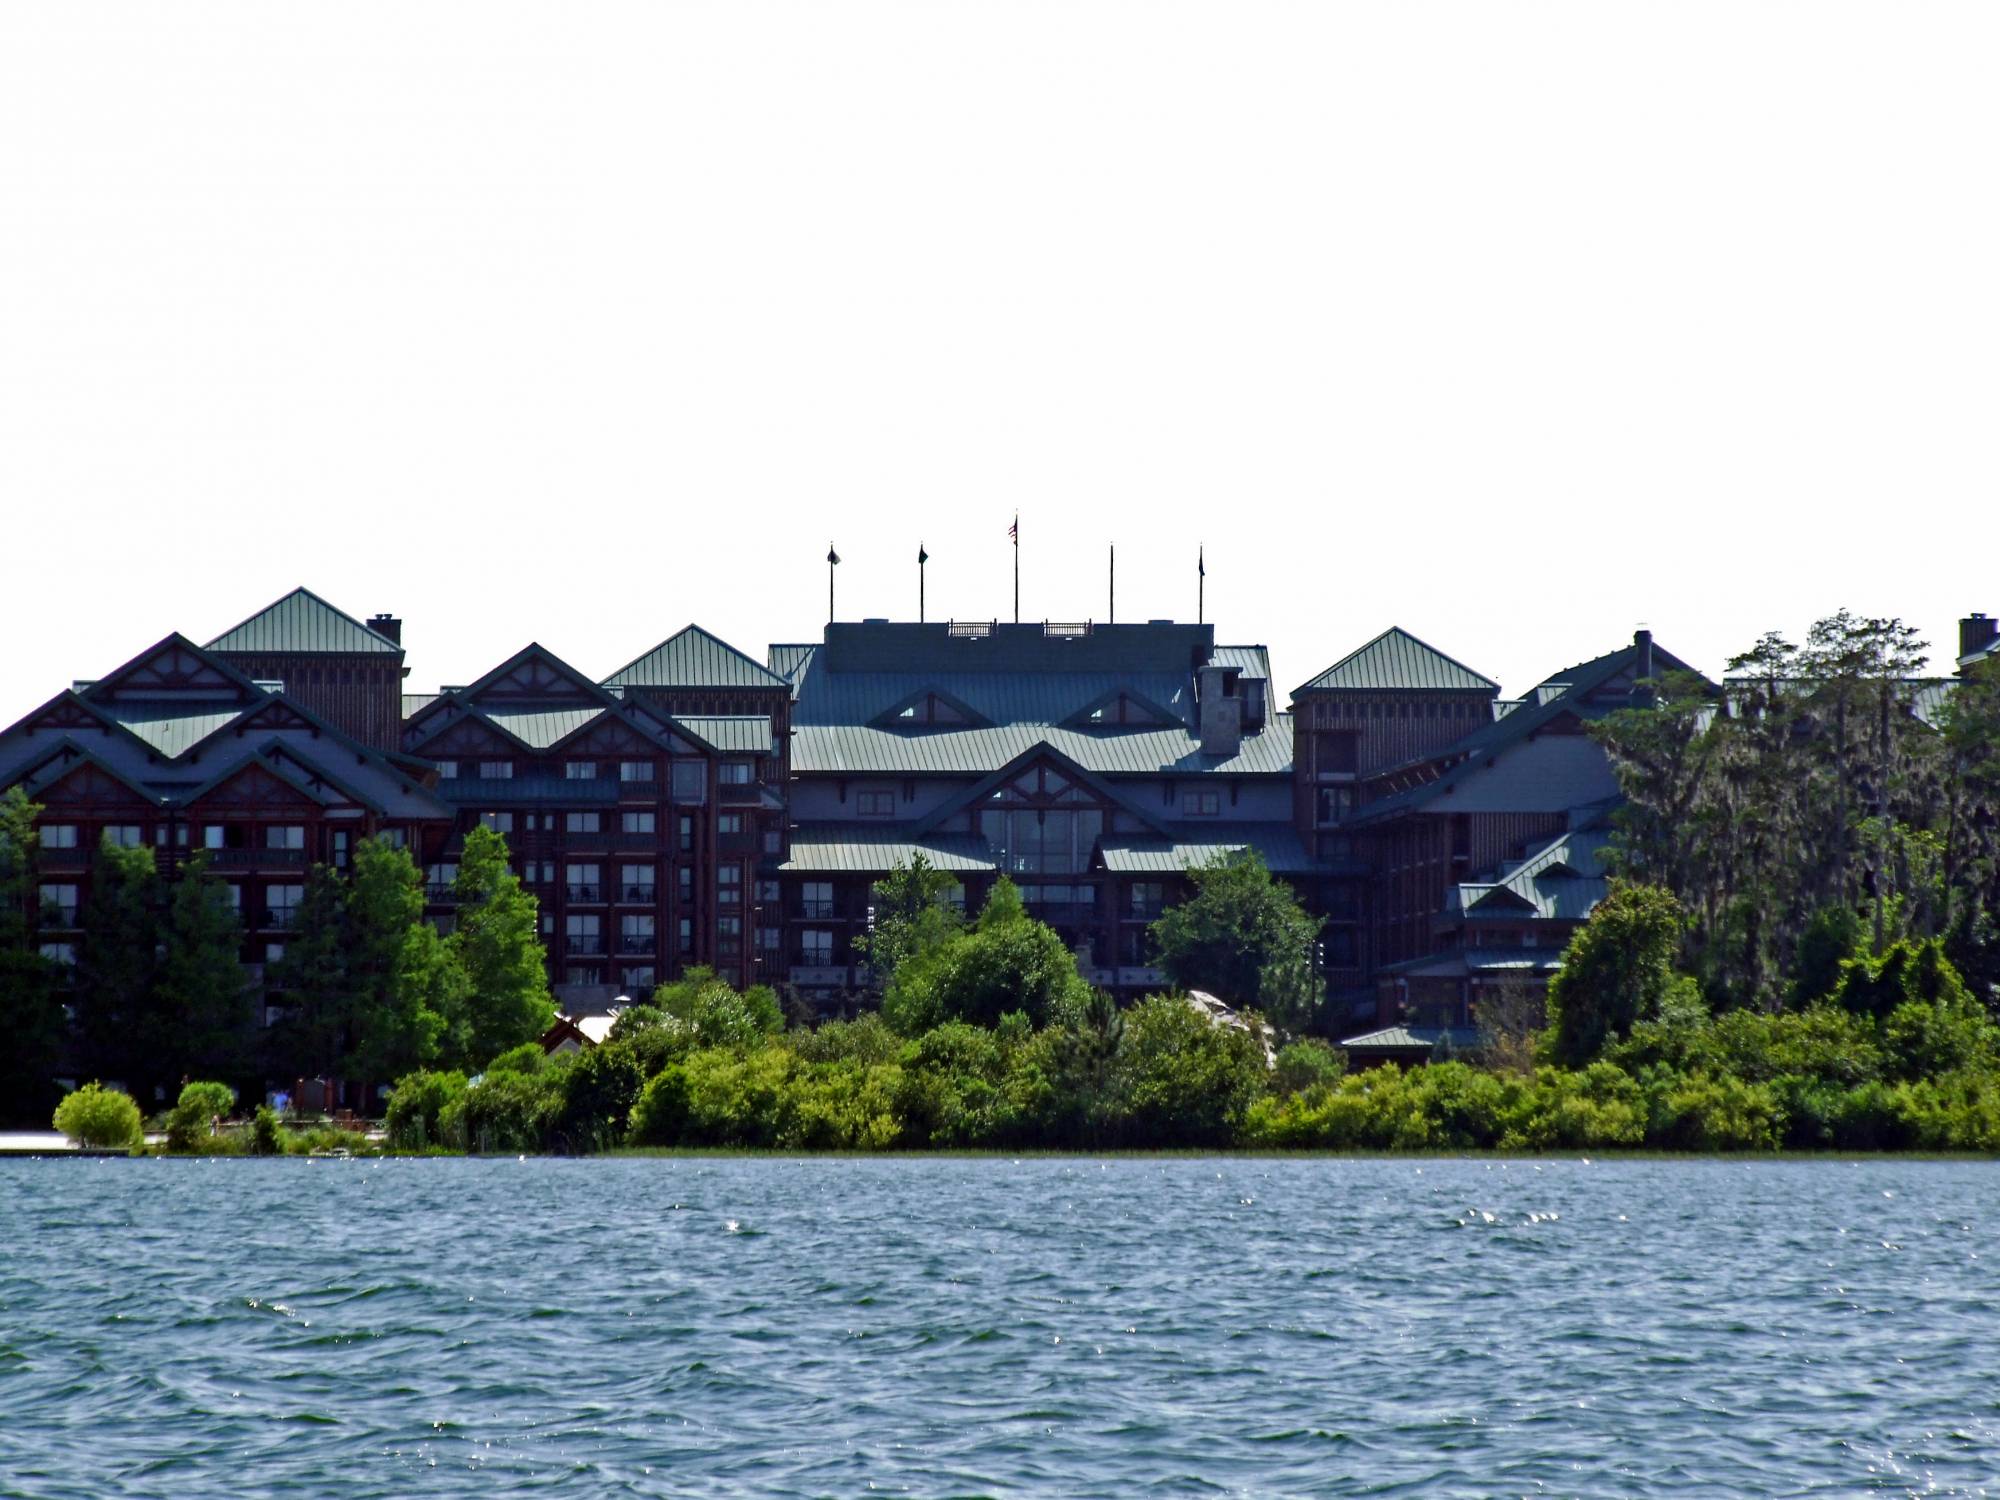 Wilderness Lodge - a view from the water